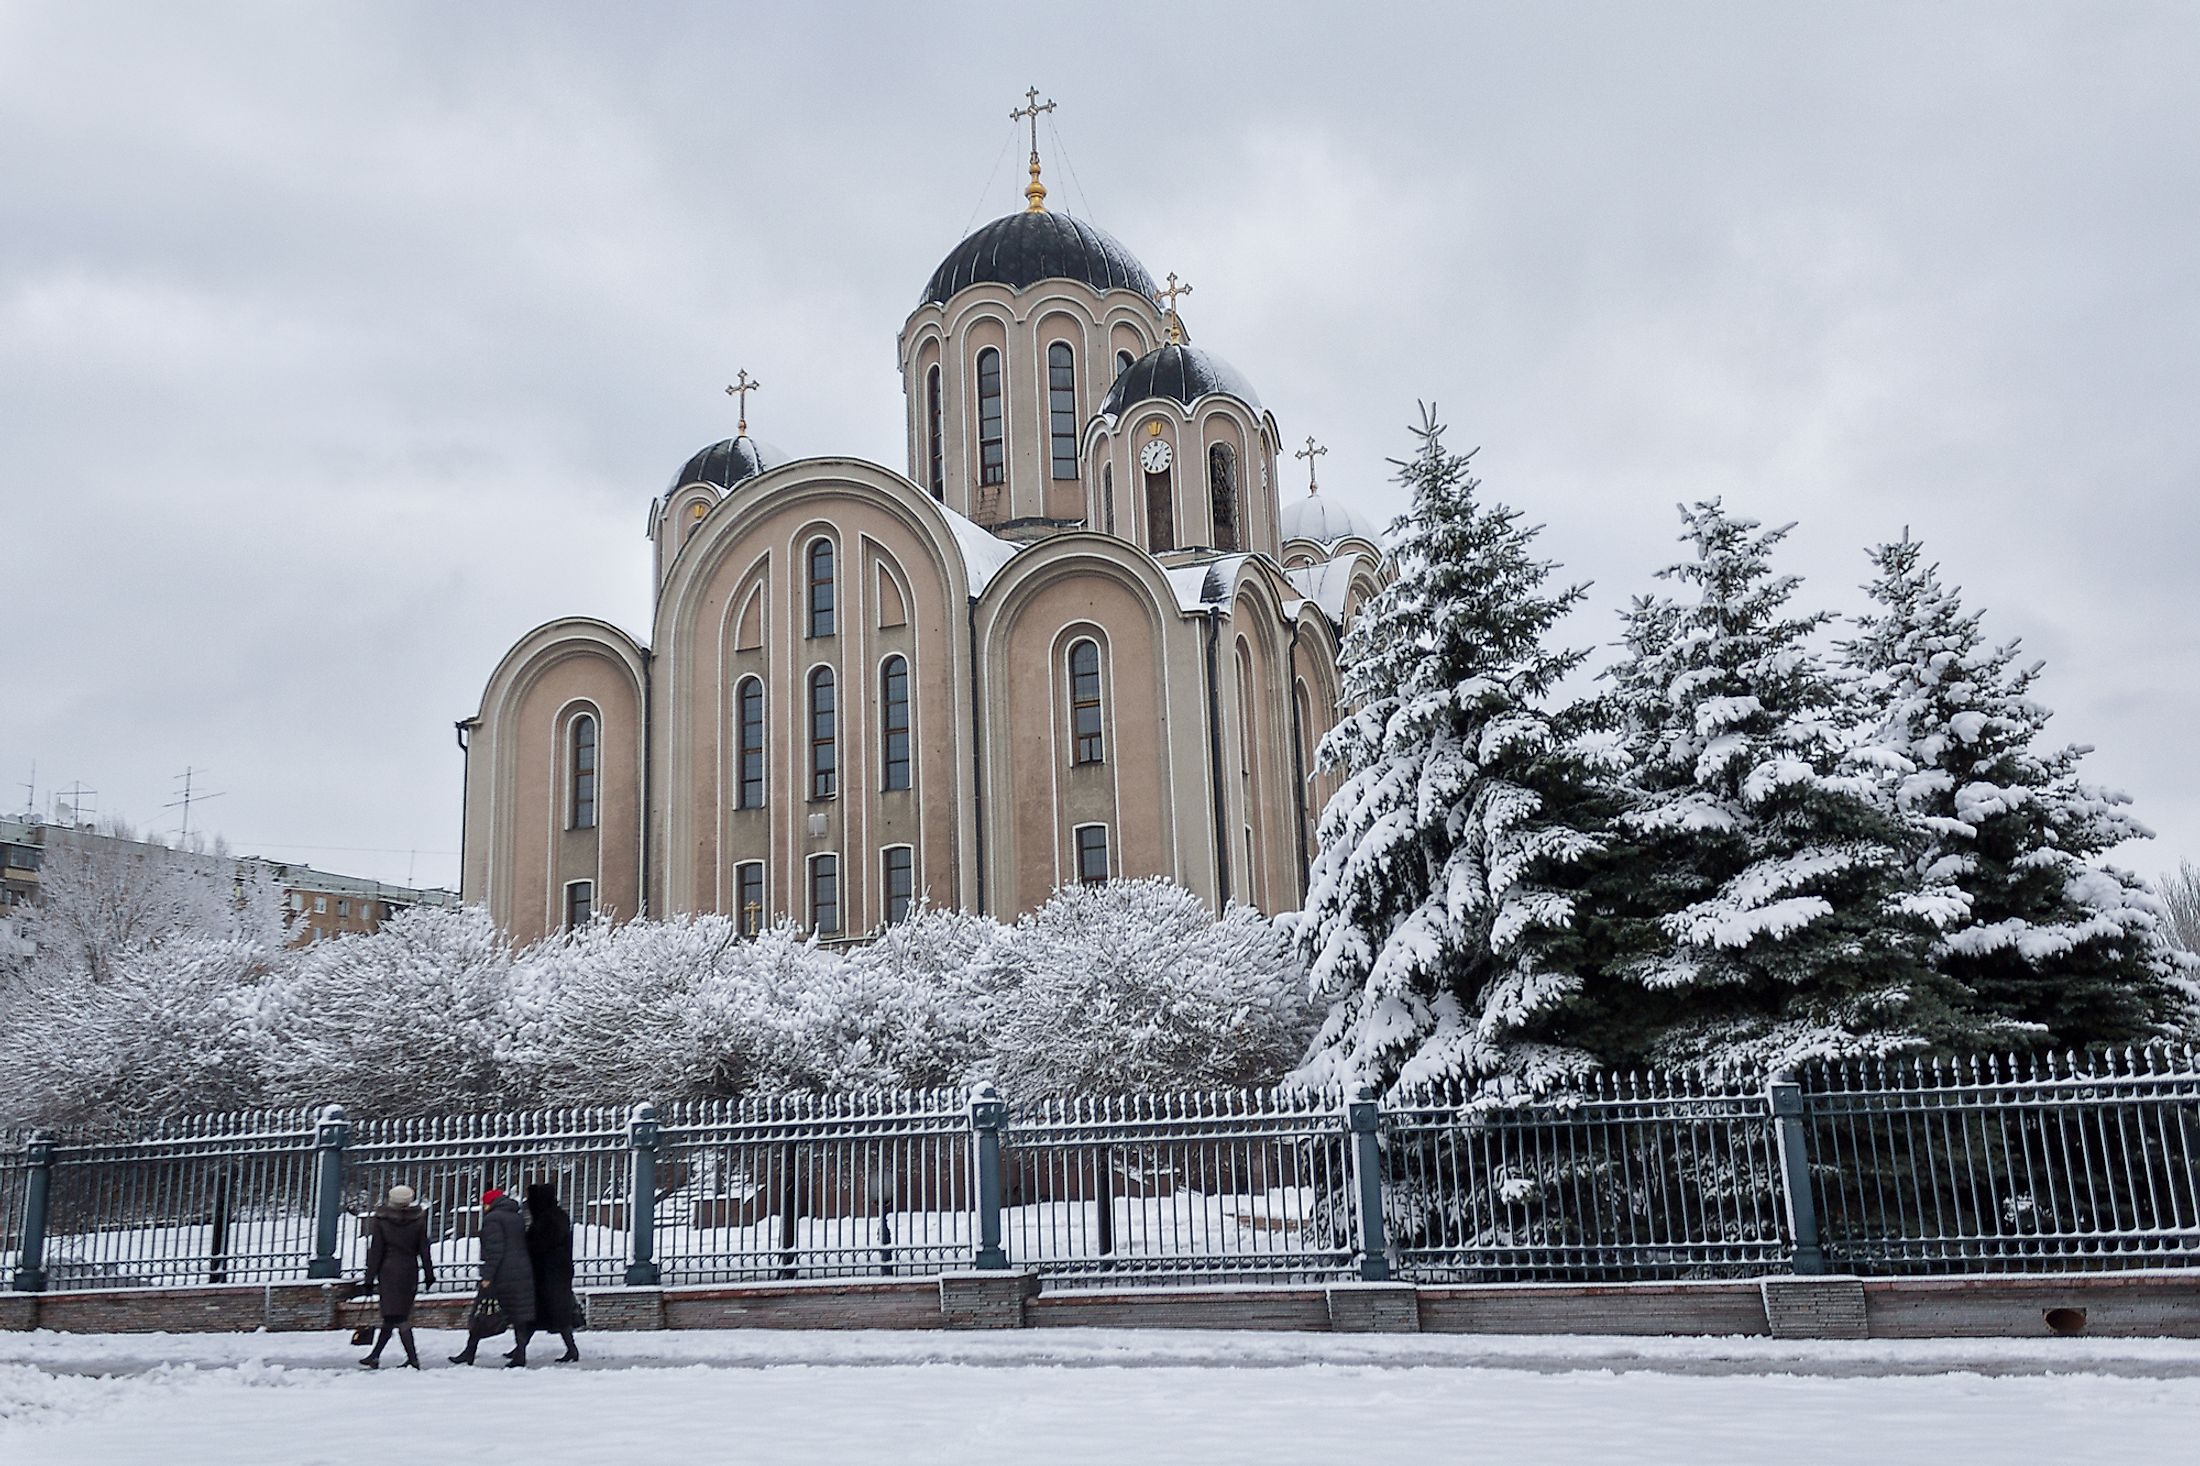 Church of the Cathedral of St. George and parishioners during winter in Makiivka, Ukraine. Editorial credit: DmyTo / Shutterstock.com